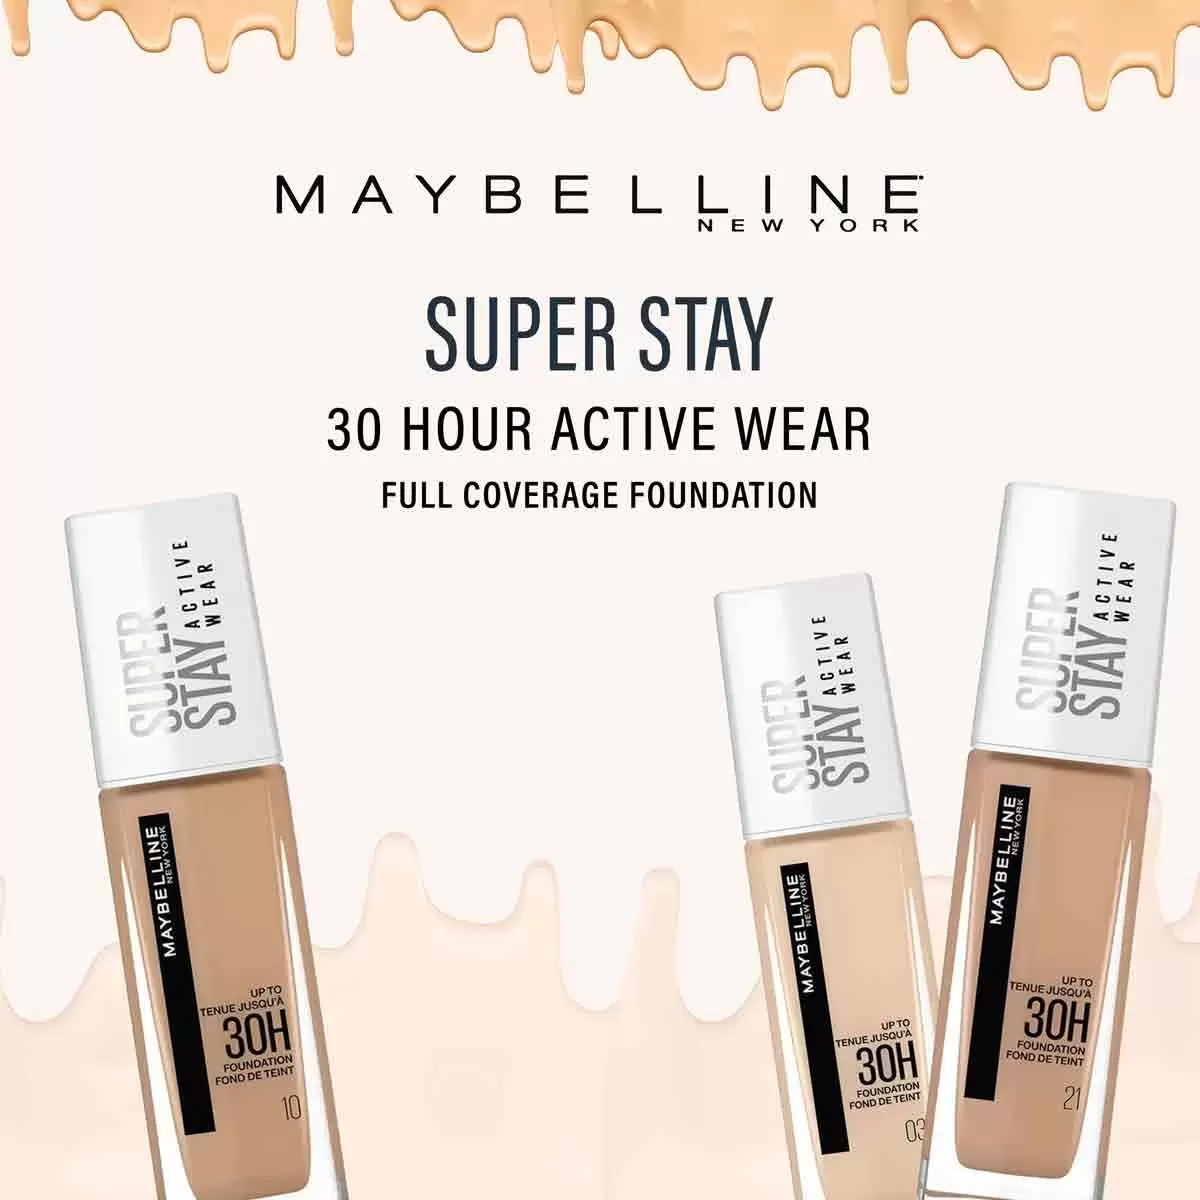 about Foundation MAYBELLINE MAYBELLINE SUPERSTAY FULL COVERAGE FOUNDATION